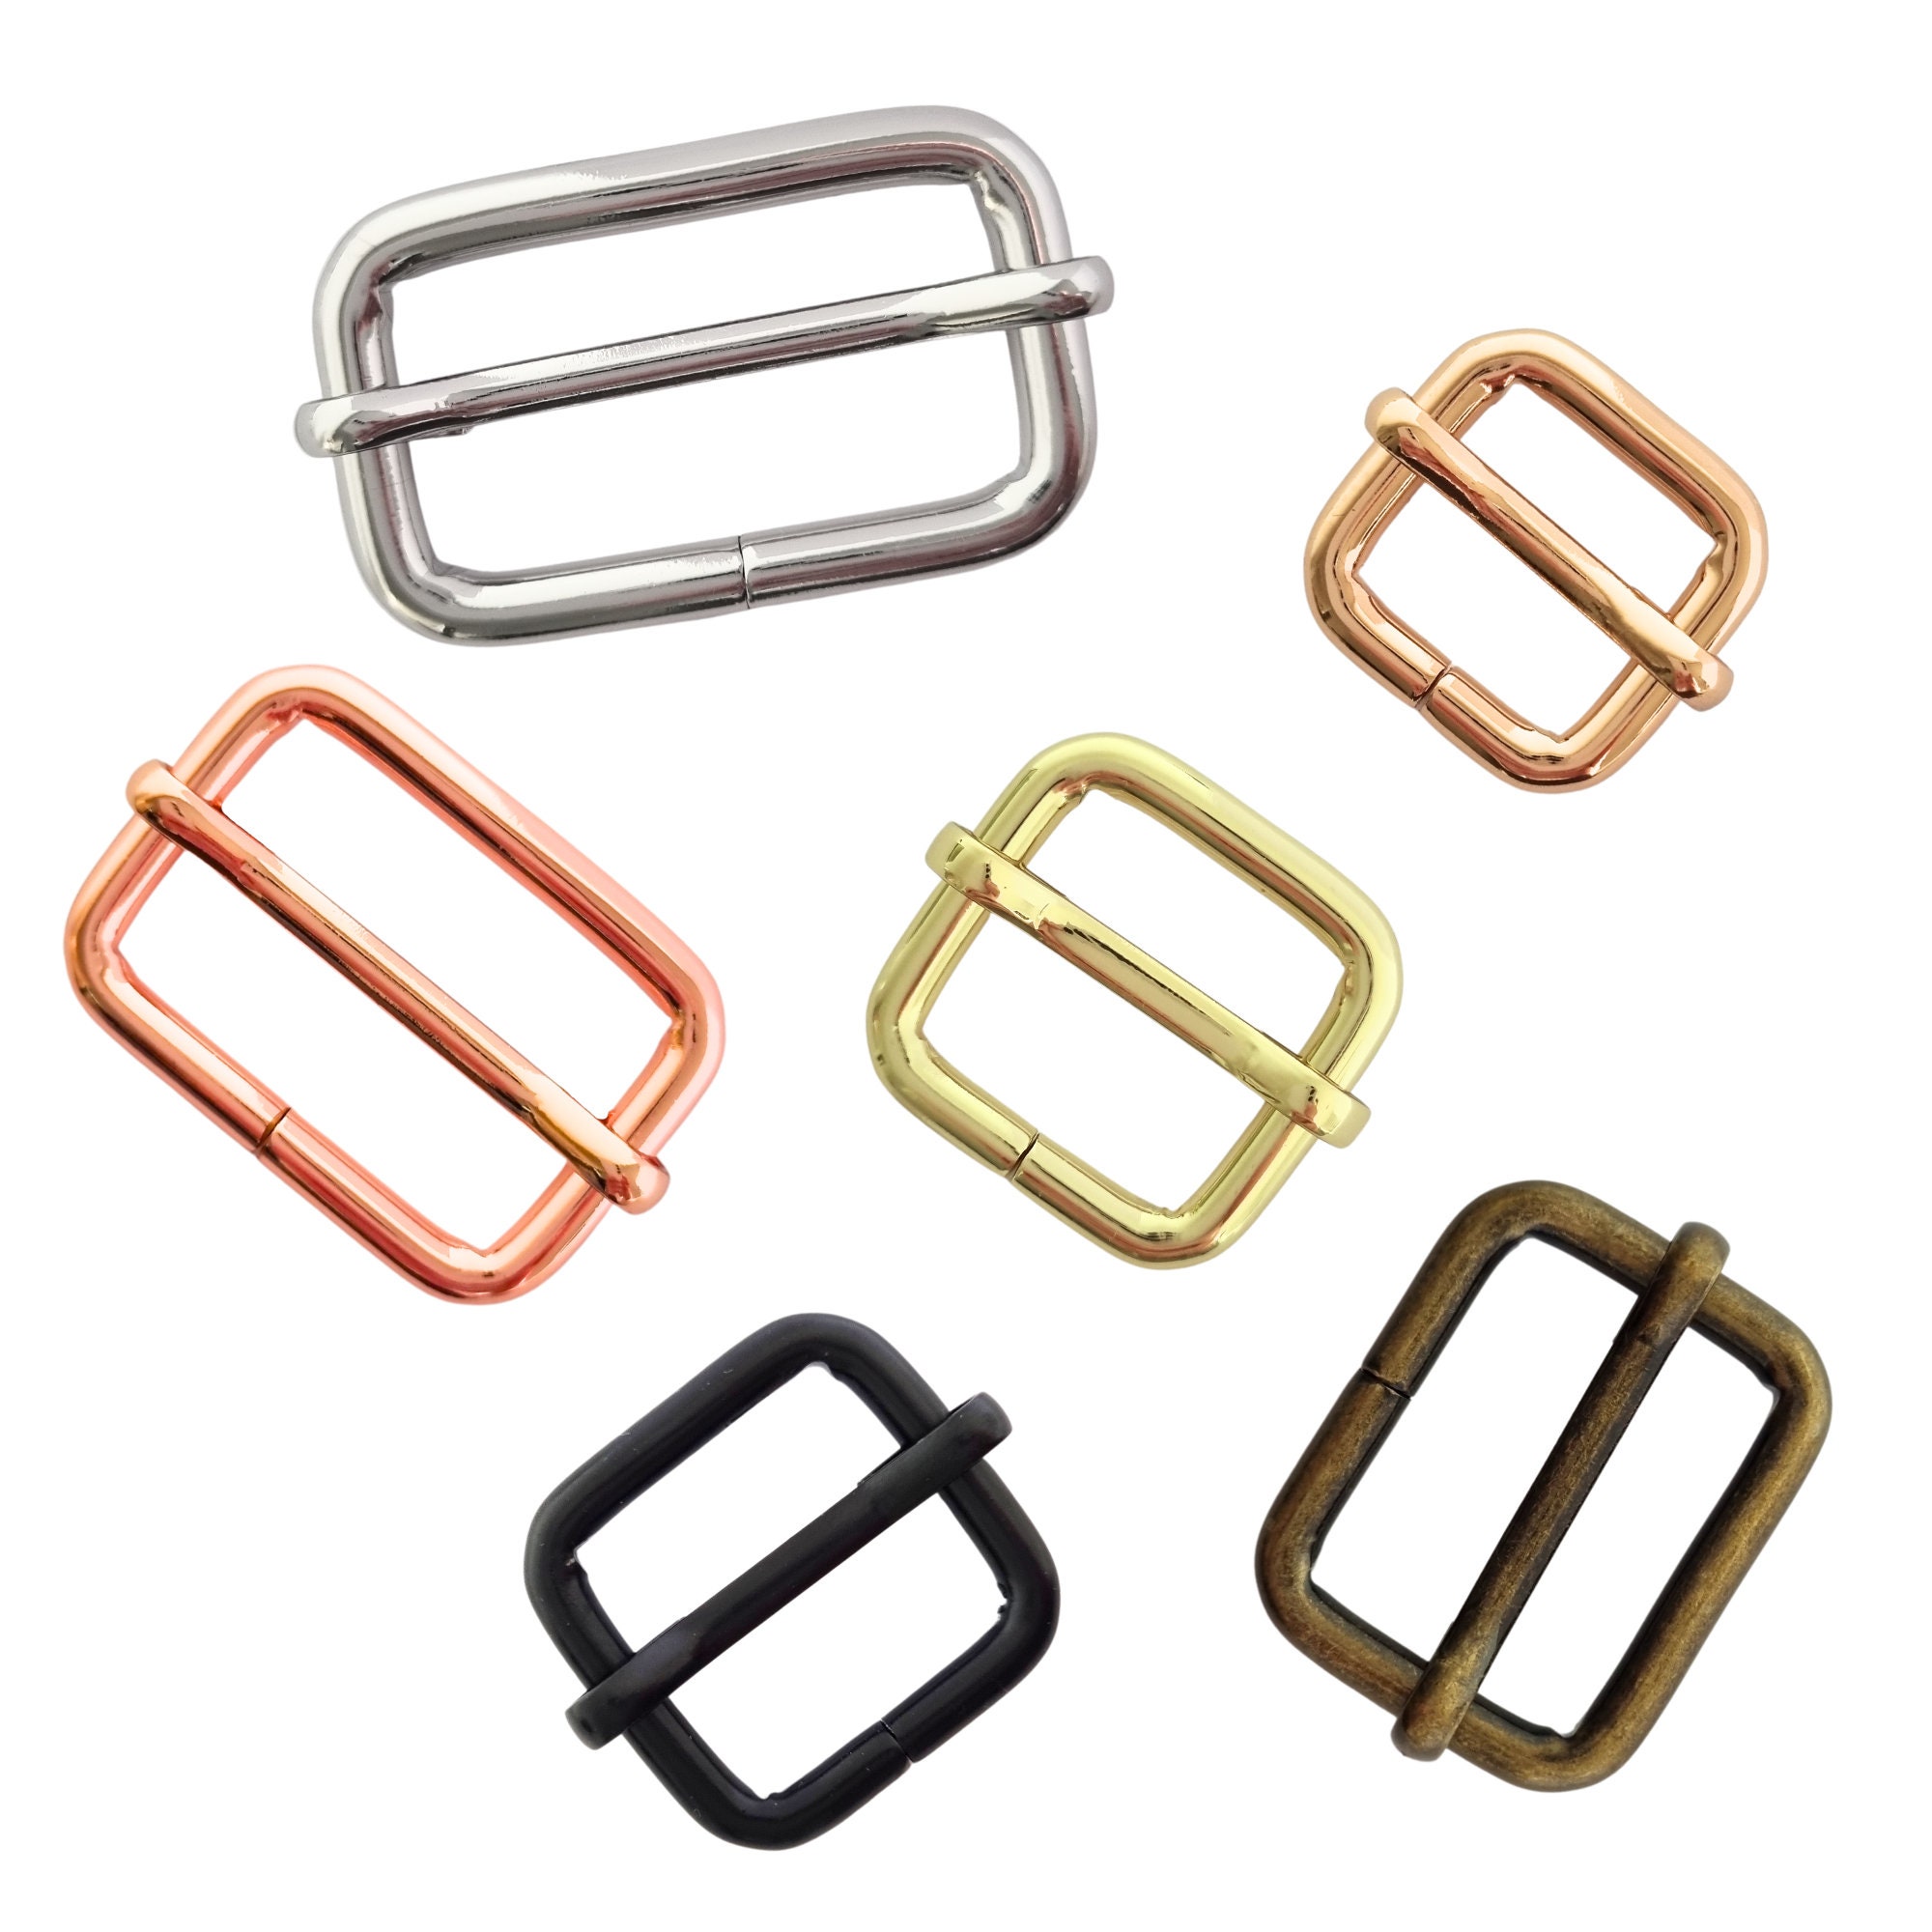 4 BUCKLES 1 1/2 or 2 Flat or Chamber SIDE RELEASE Buckle, 38mm or